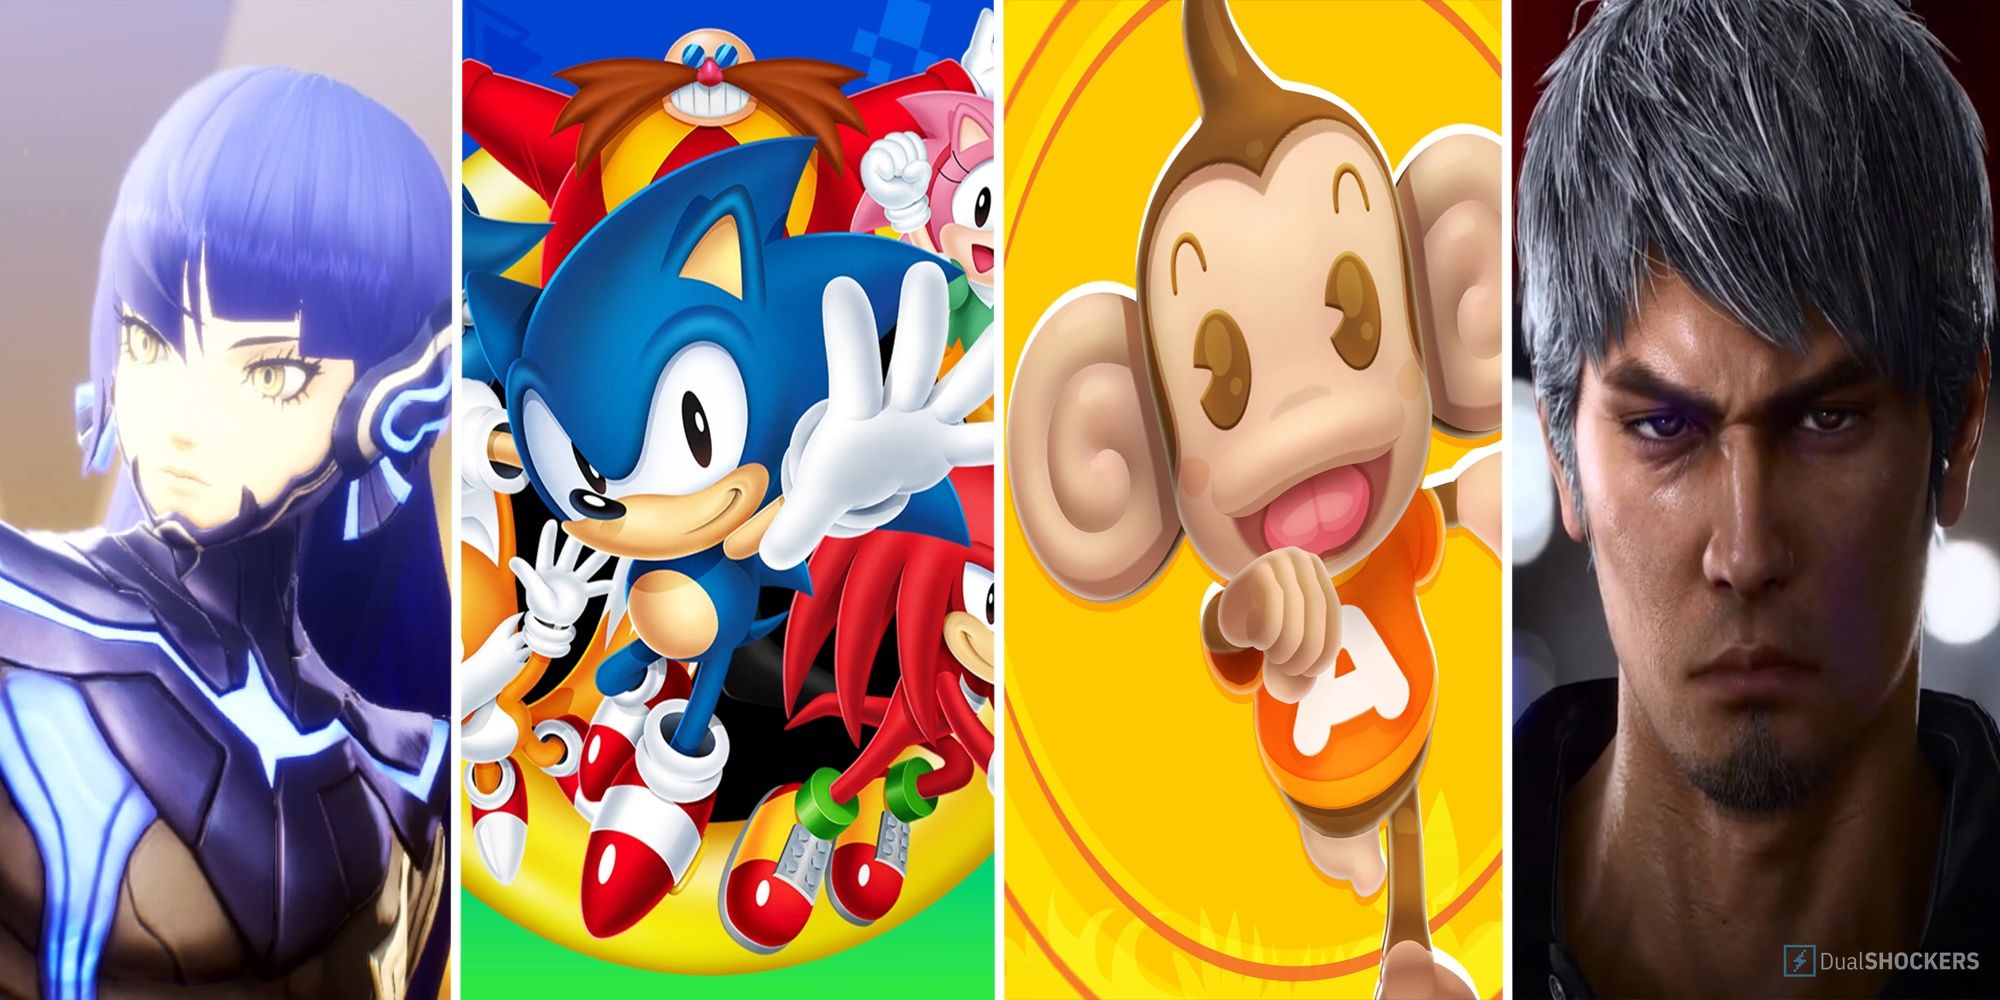 From Left To Right: Shin Megami Tensei, Sonic The Hedgehog, Super Monkey Ball, And Like A Dragon (Yakuza)